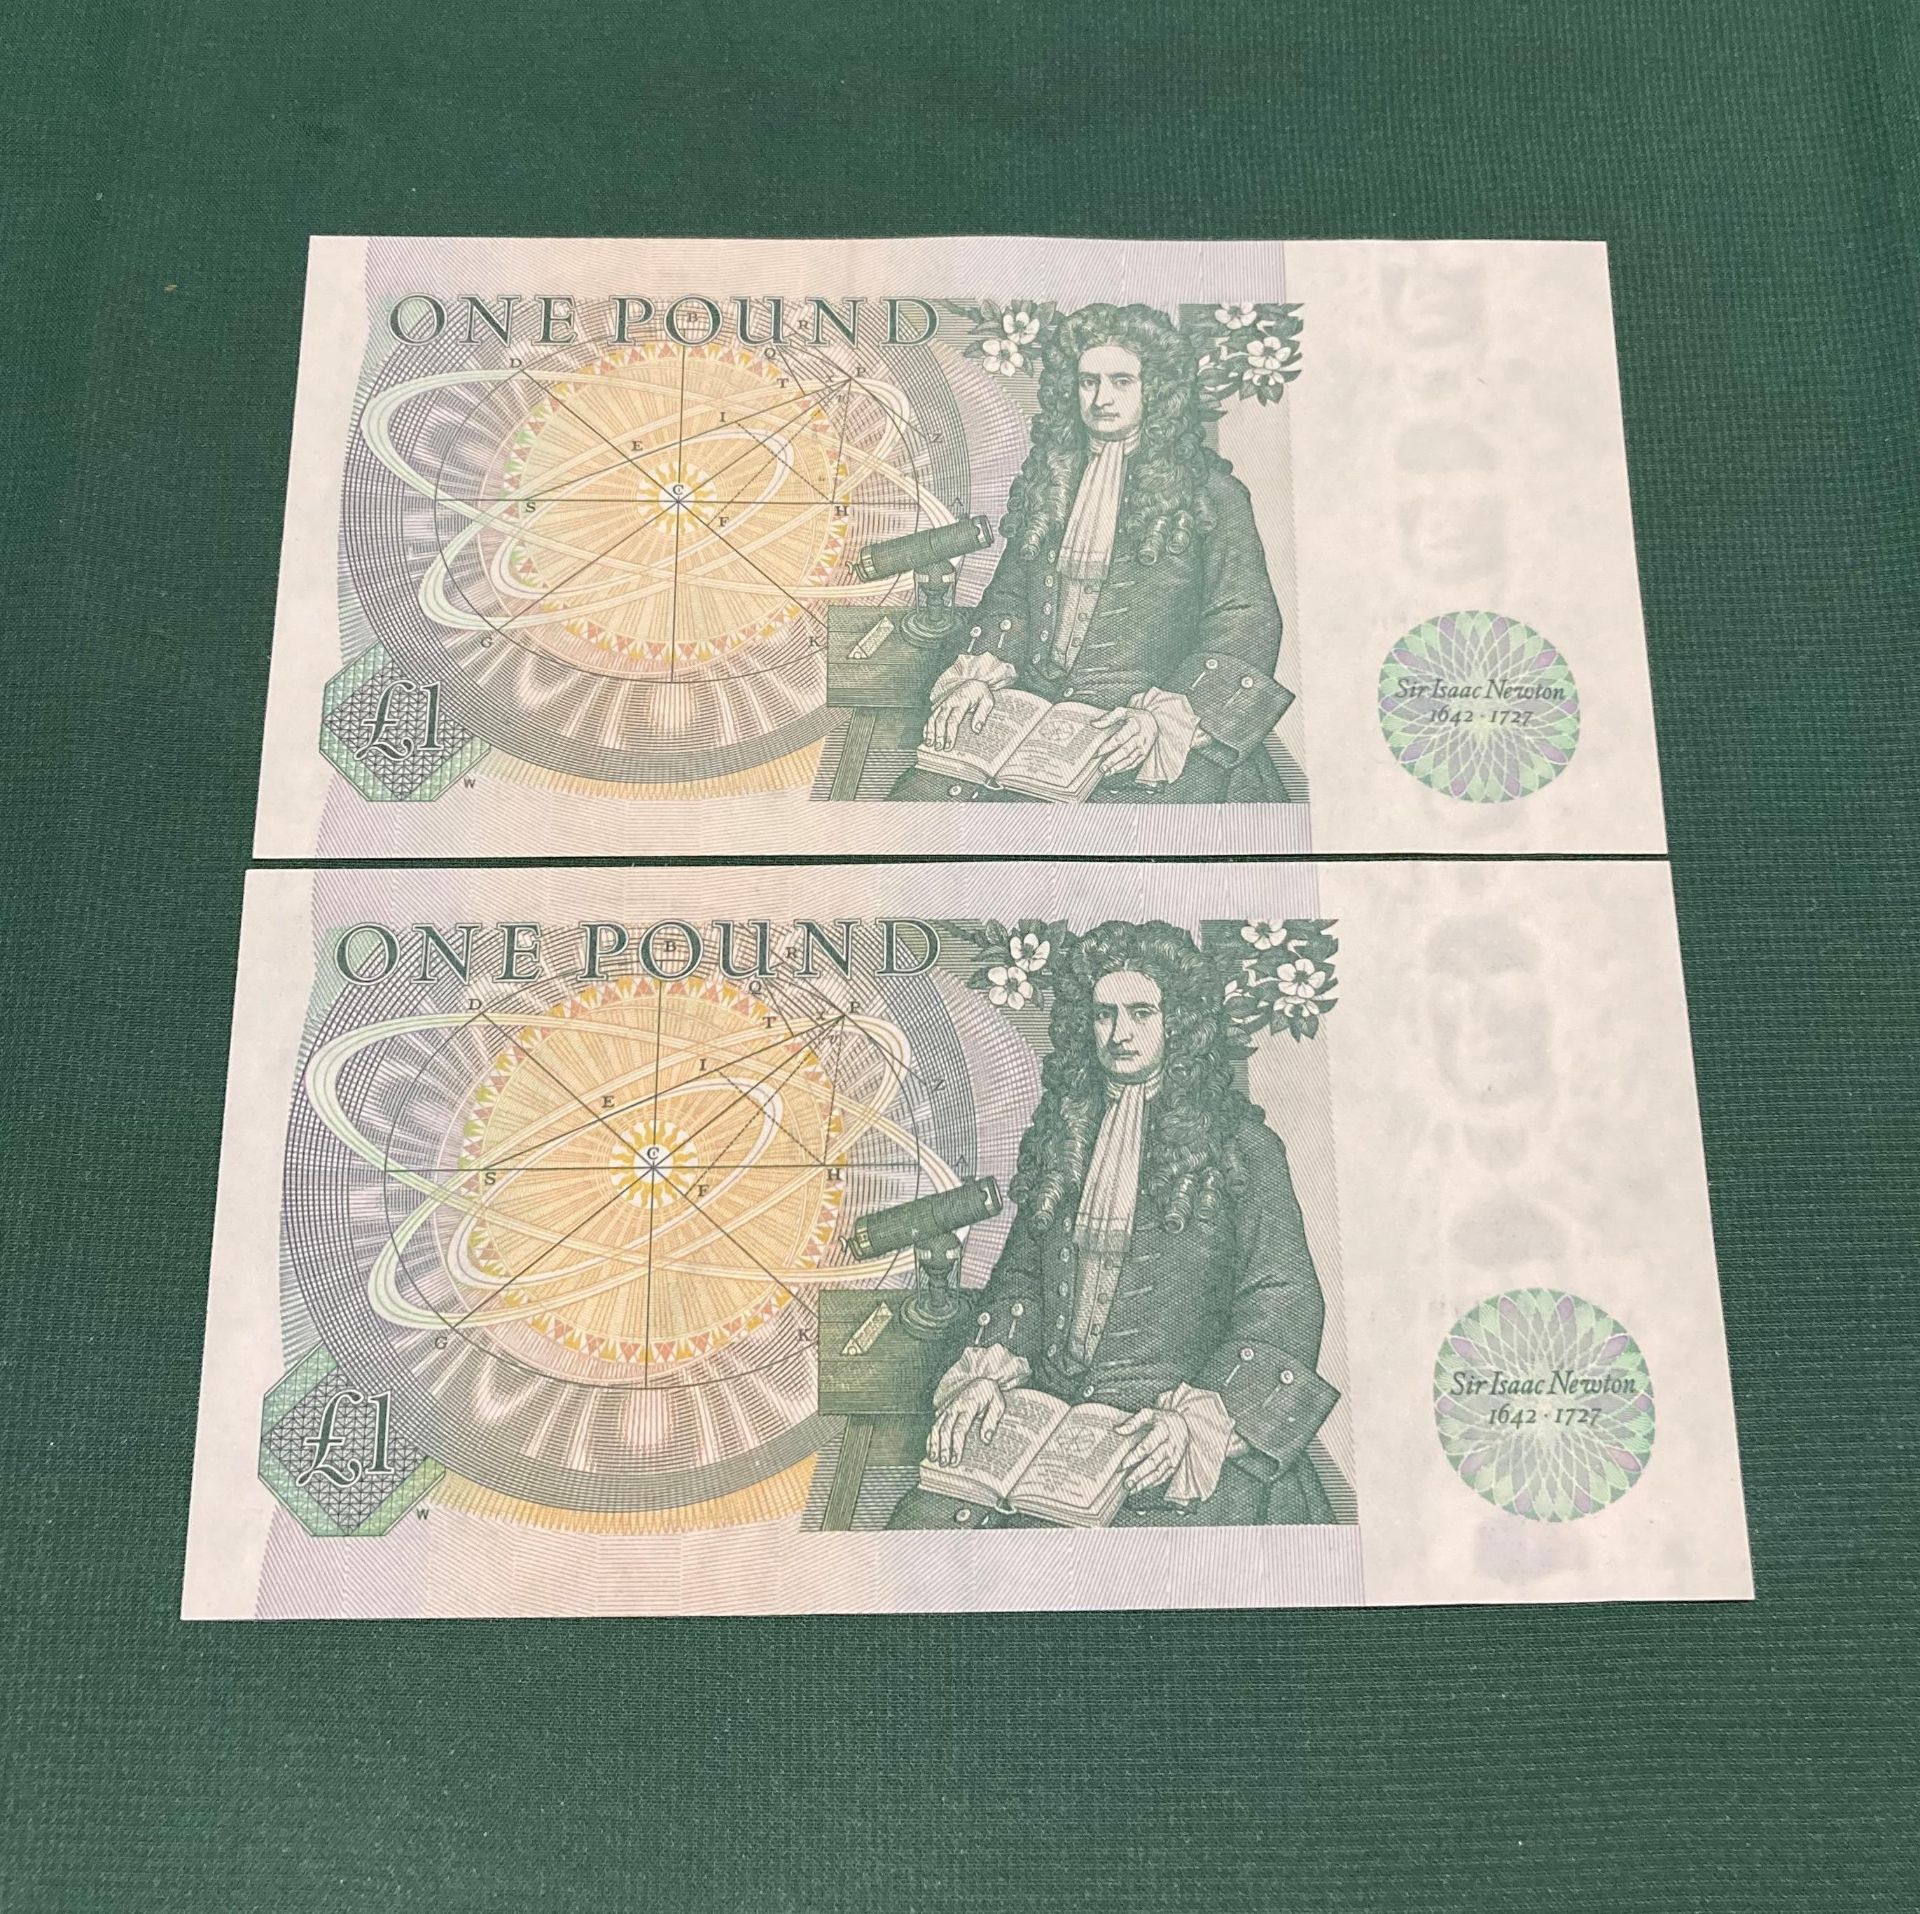 Two mint condition one pound notes, - Image 2 of 2